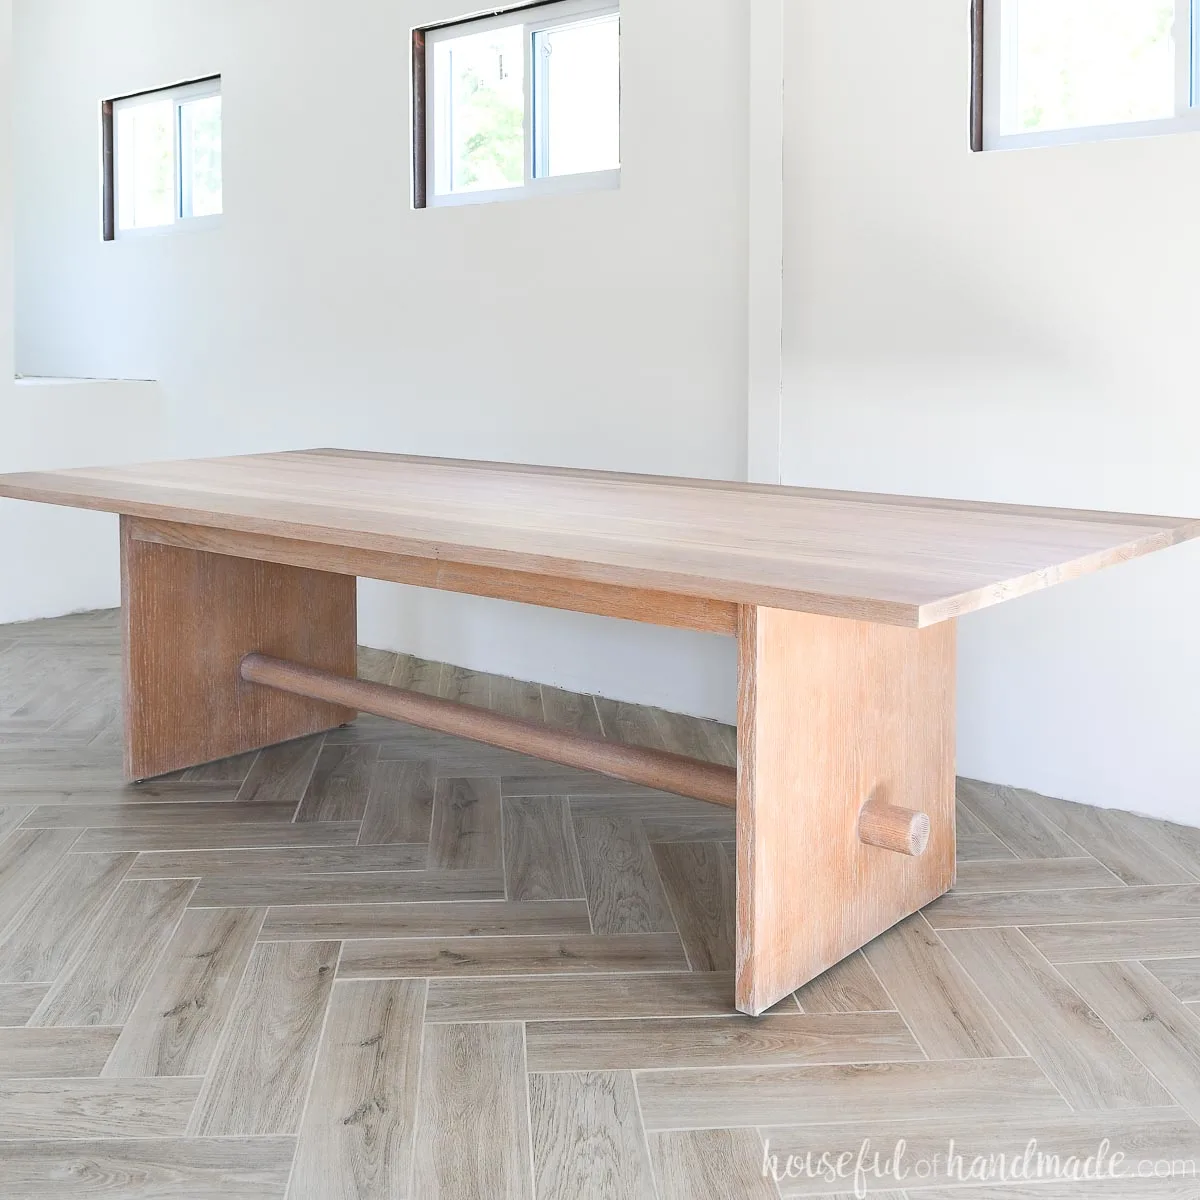 Gorgeous oak conference table refinished with TrueTone Pickled White stain sitting on herringbone patterned wood tile floor. 